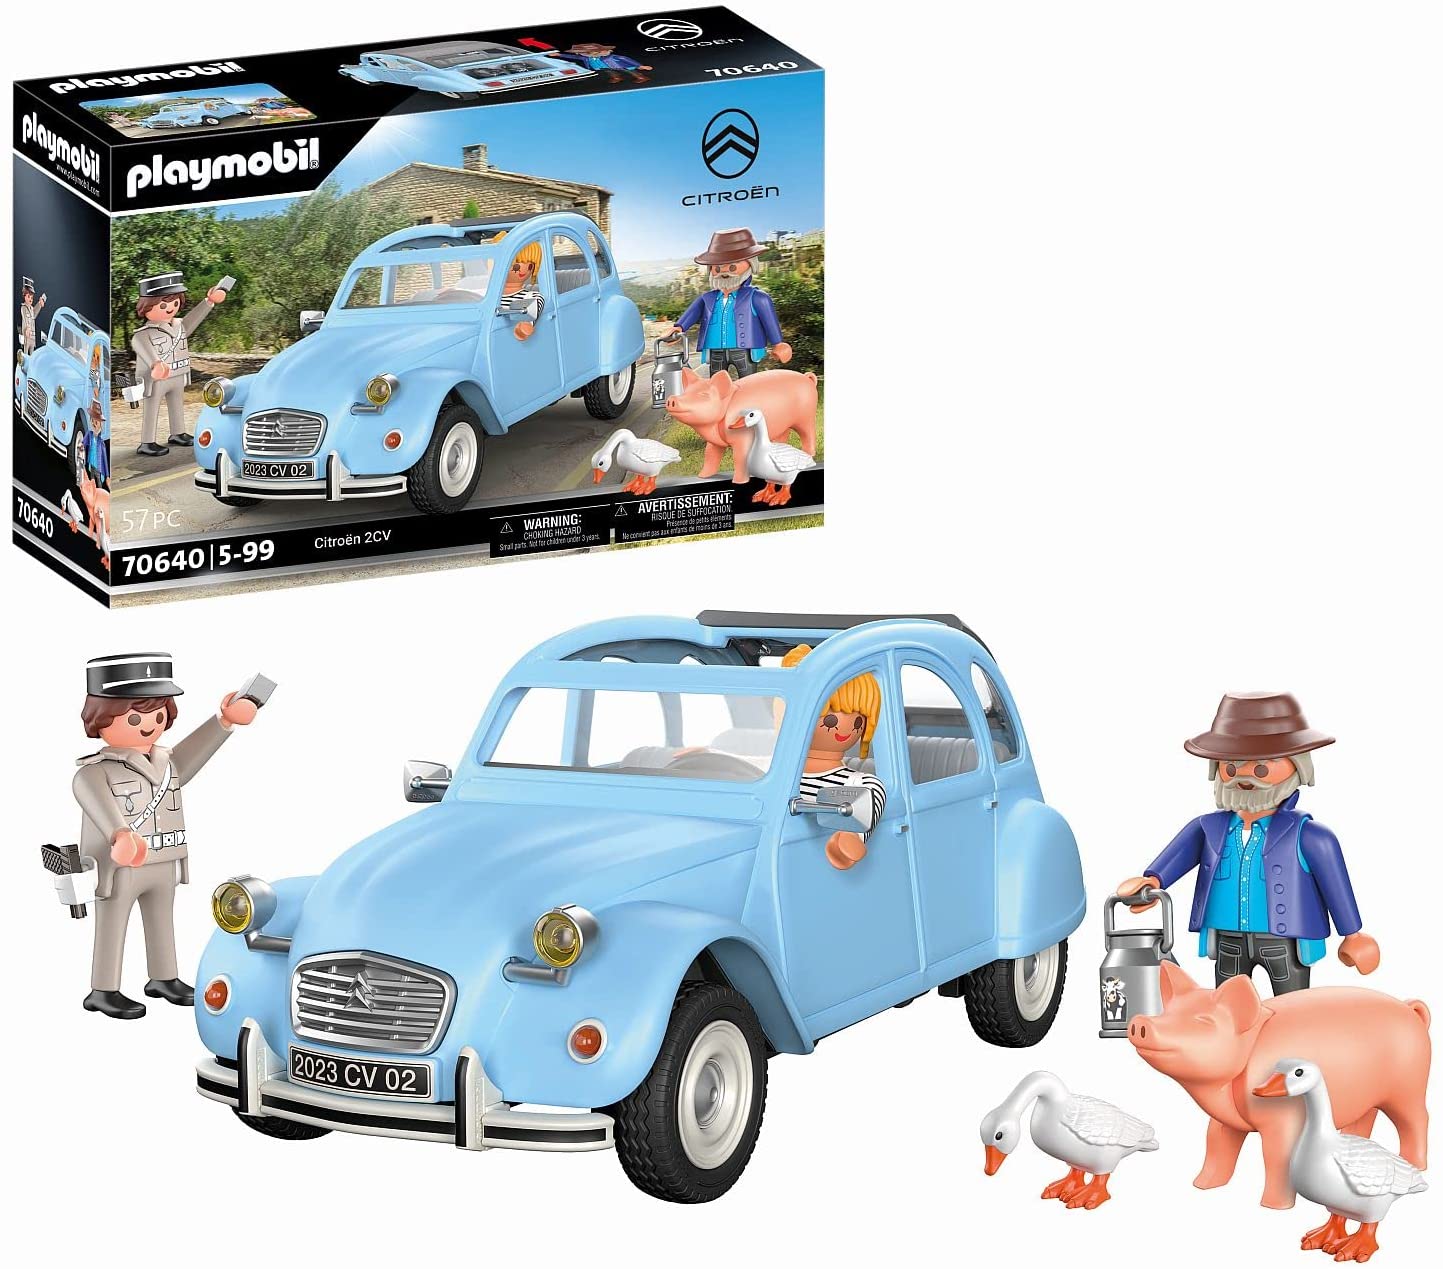 Playmobil Classic Car 70640 Citroën 2 CV Duck with Removable Hood, Collectable for Car Fans, Toy for Collectors and Children from 5 Years